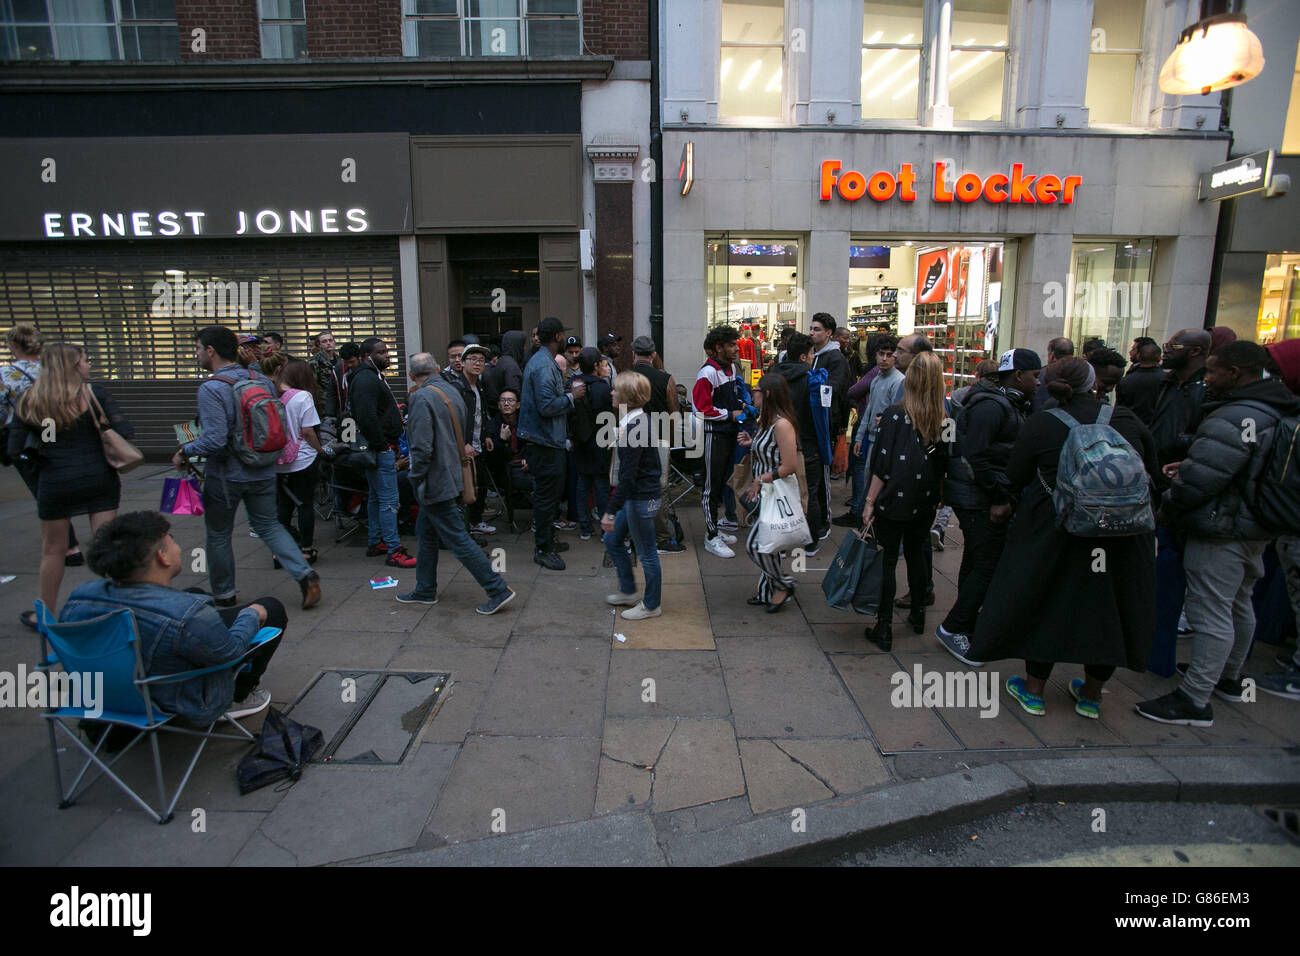 People queuing in front of a Foot Locker shop in Oxford Street, London,  waiting for the new release of the Adidas Yeezy Boost 350, designed by  Kanye West which is released on